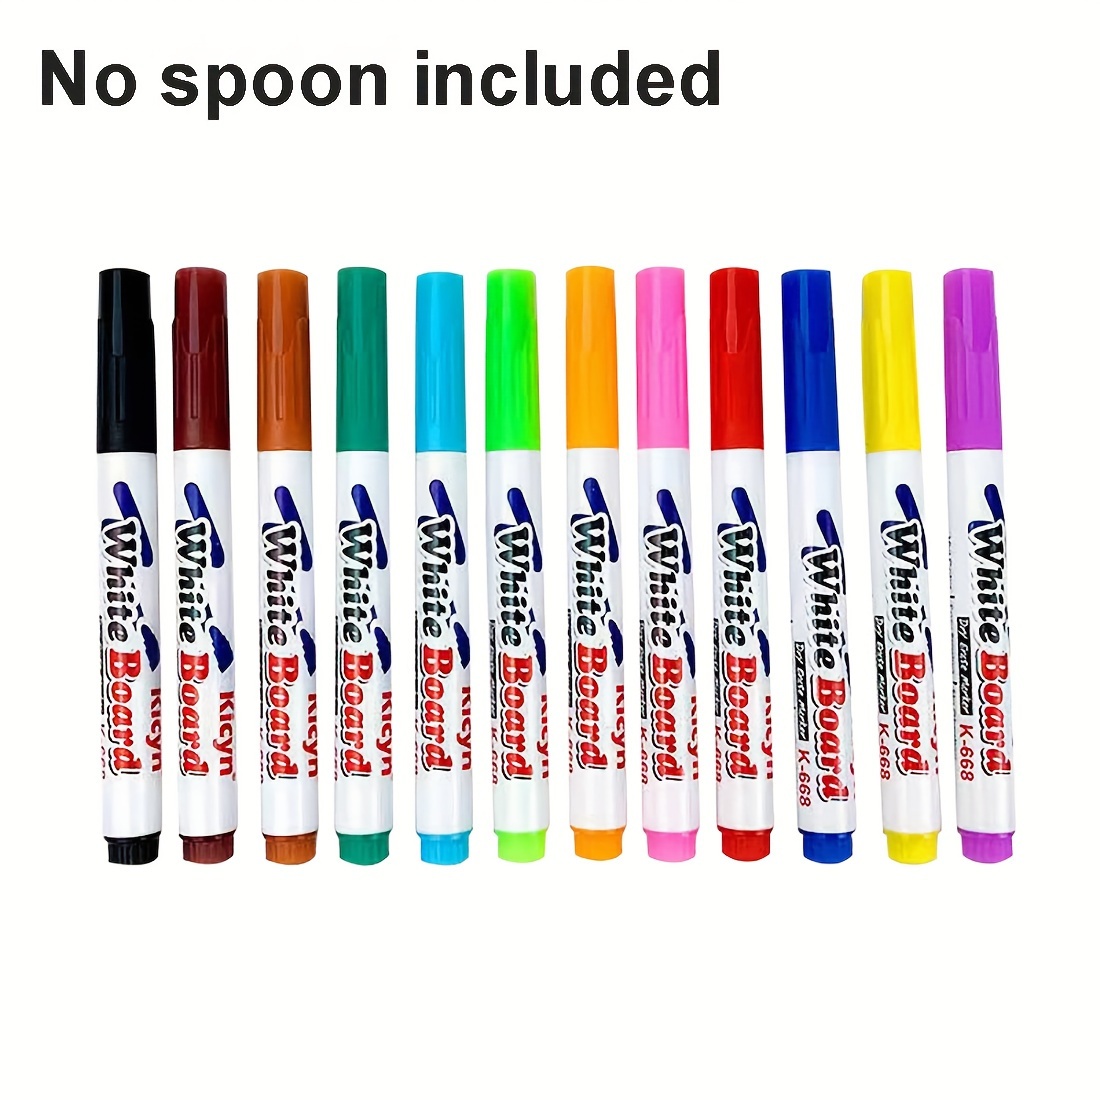 Wholesale Montessori Multi Function Water Paint Pen Pack With Floating Ink  Doodle And Whiteboard Markers Ideal For Early Education And Art Supplies  Z0012 Dhhes From Xcjstore, $3.17